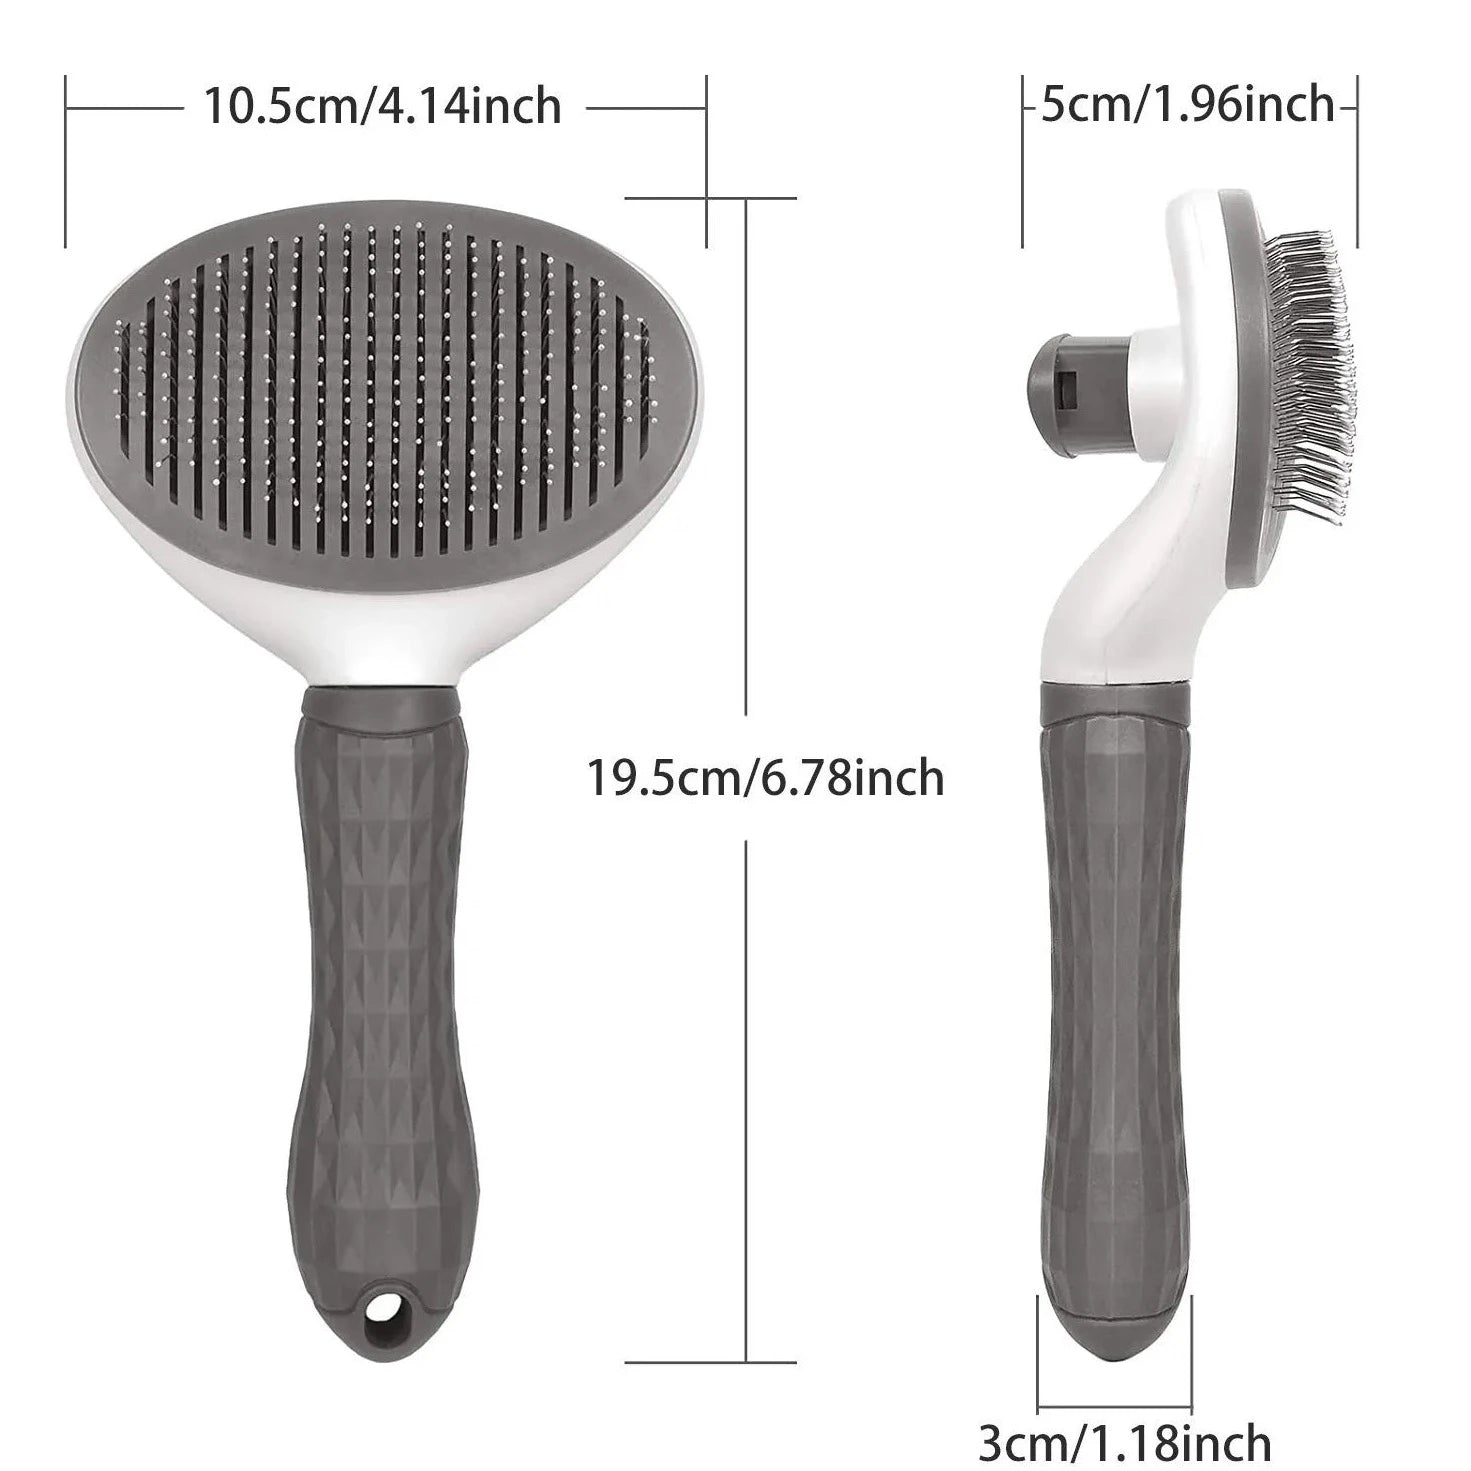 A fabulous self-cleaning slicker cat hair brush to help your furball&nbsp;to remove excess hair. <br>Super easy to clean&nbsp;- simply press the button&nbsp;<span data-mce-fragment="1">to push the hair out of the comb plate, then tear off the hair. Suitable for short and long haired cats as well. <br>It is gentle to your little friend's skin.</span>